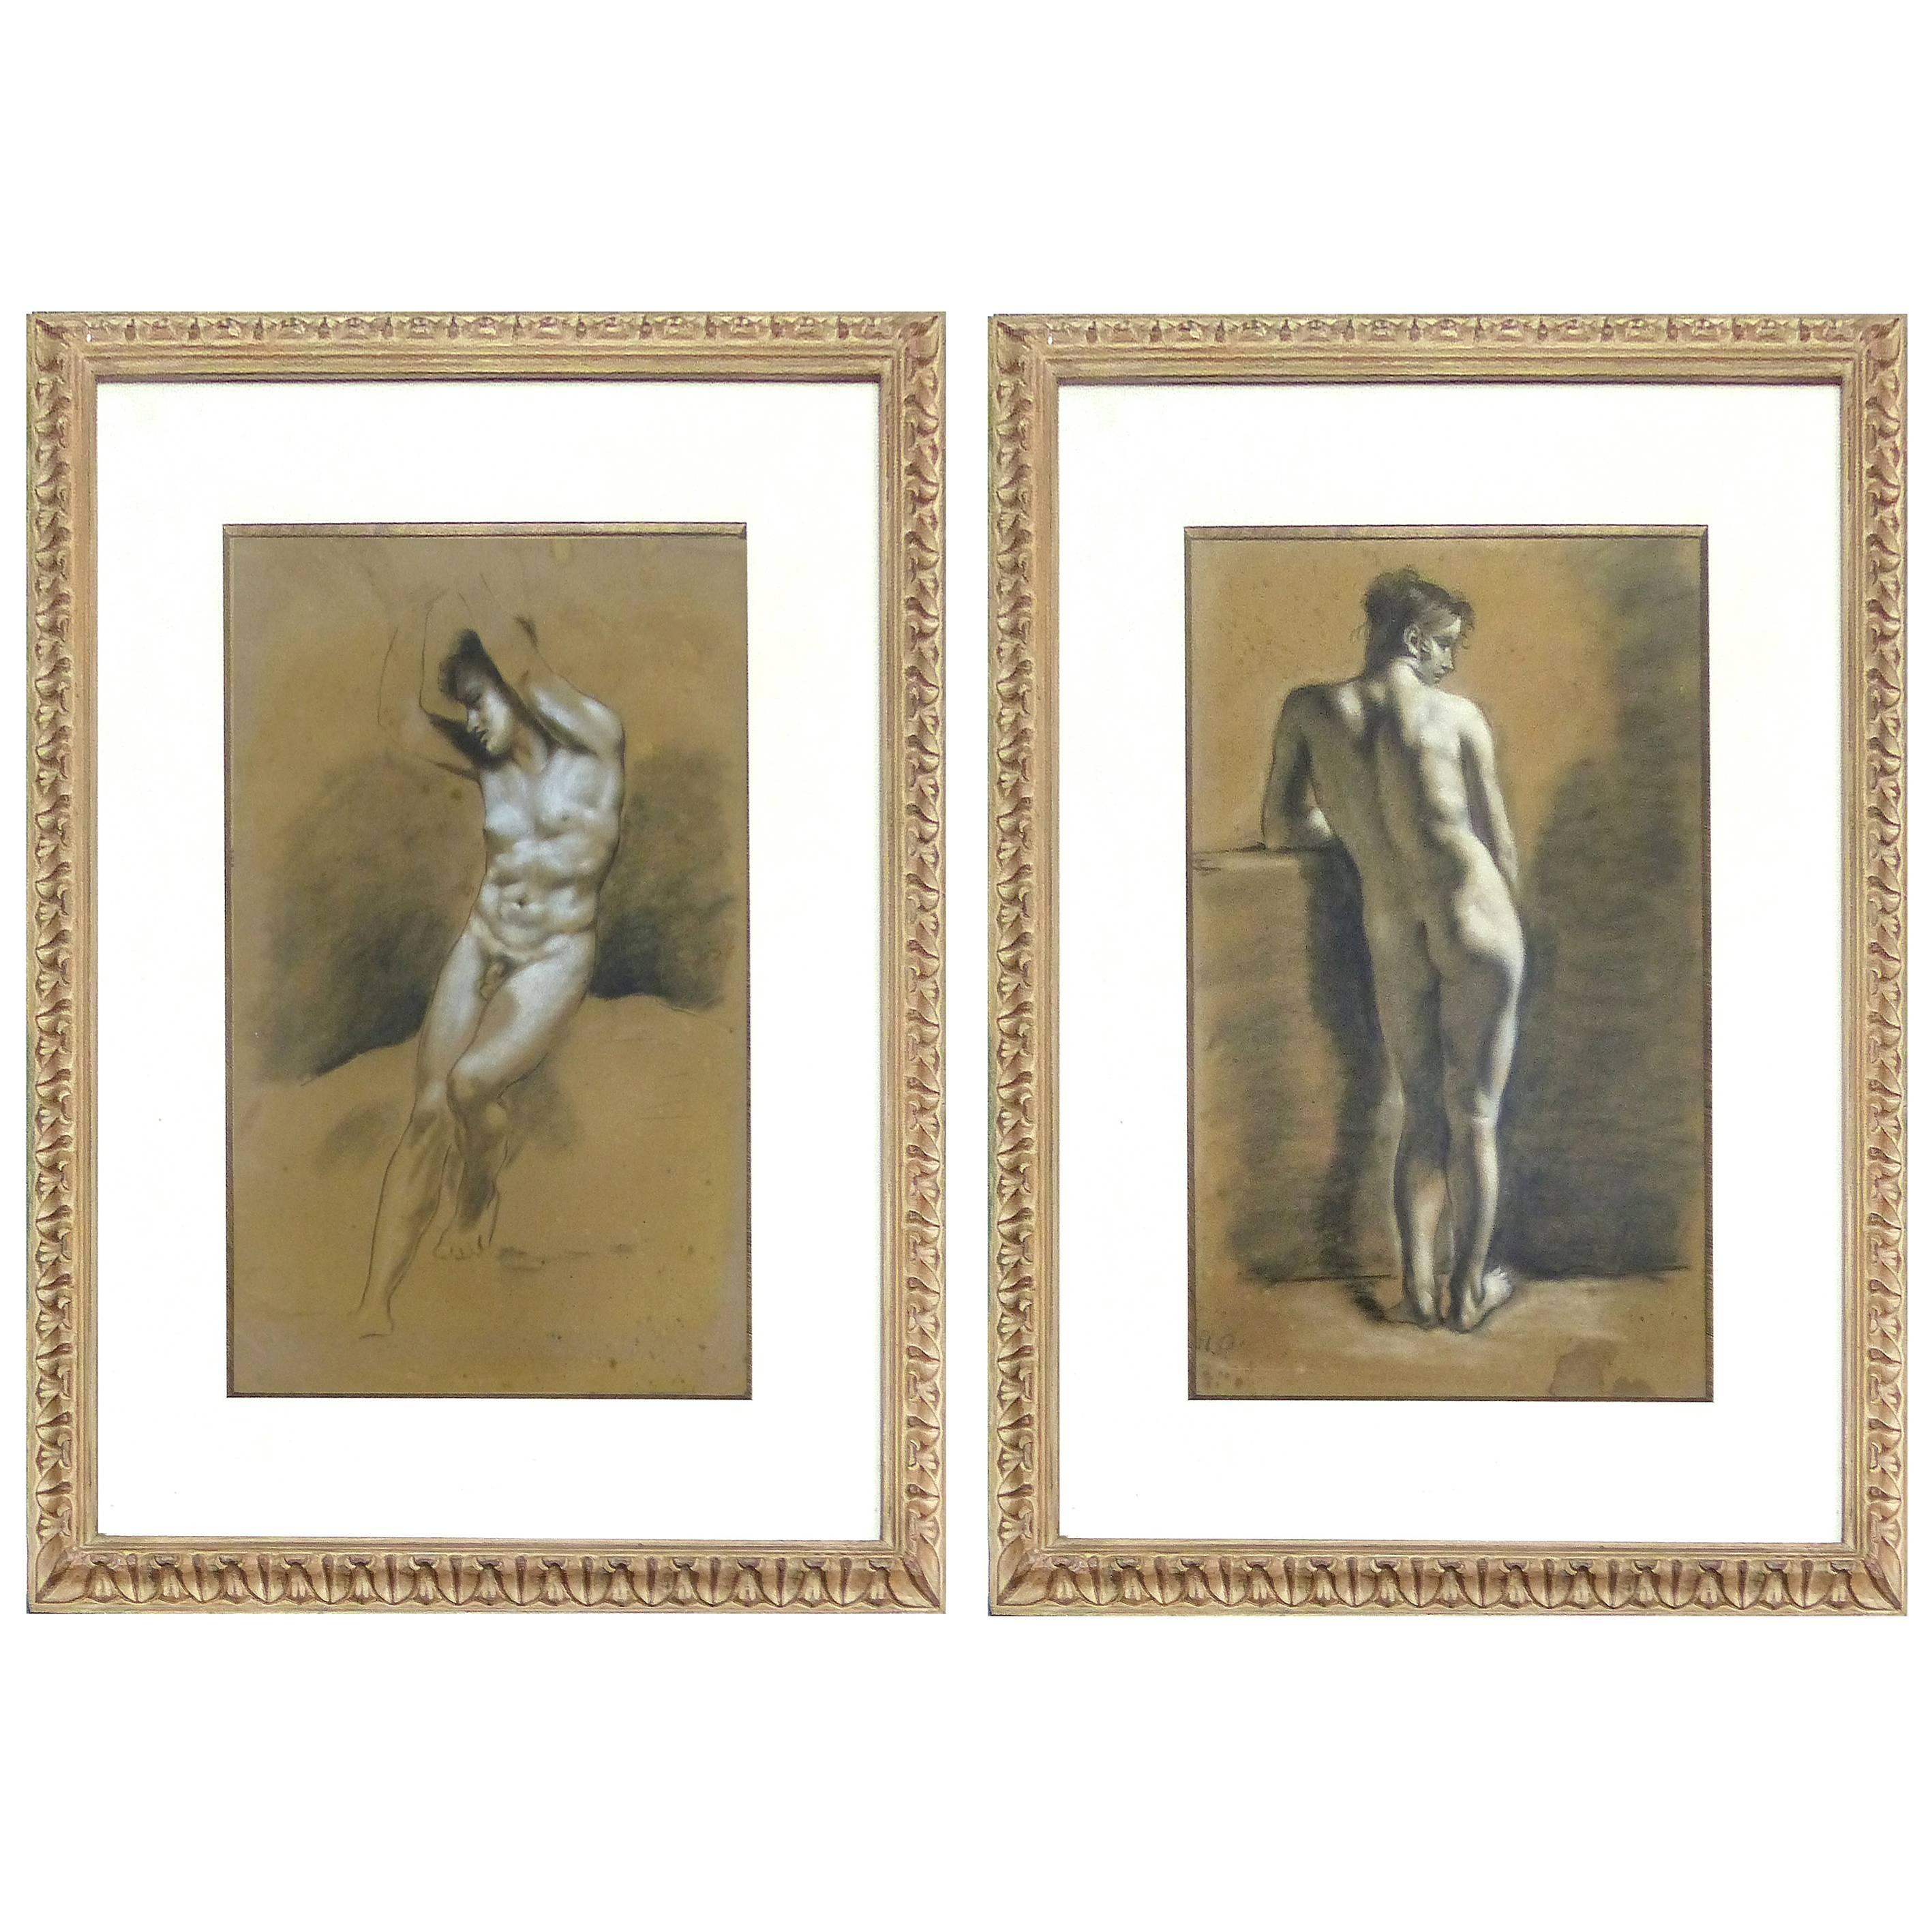 Pair of Drawings of Male Nude Figures attributed to Francois Boucher, circa 1750